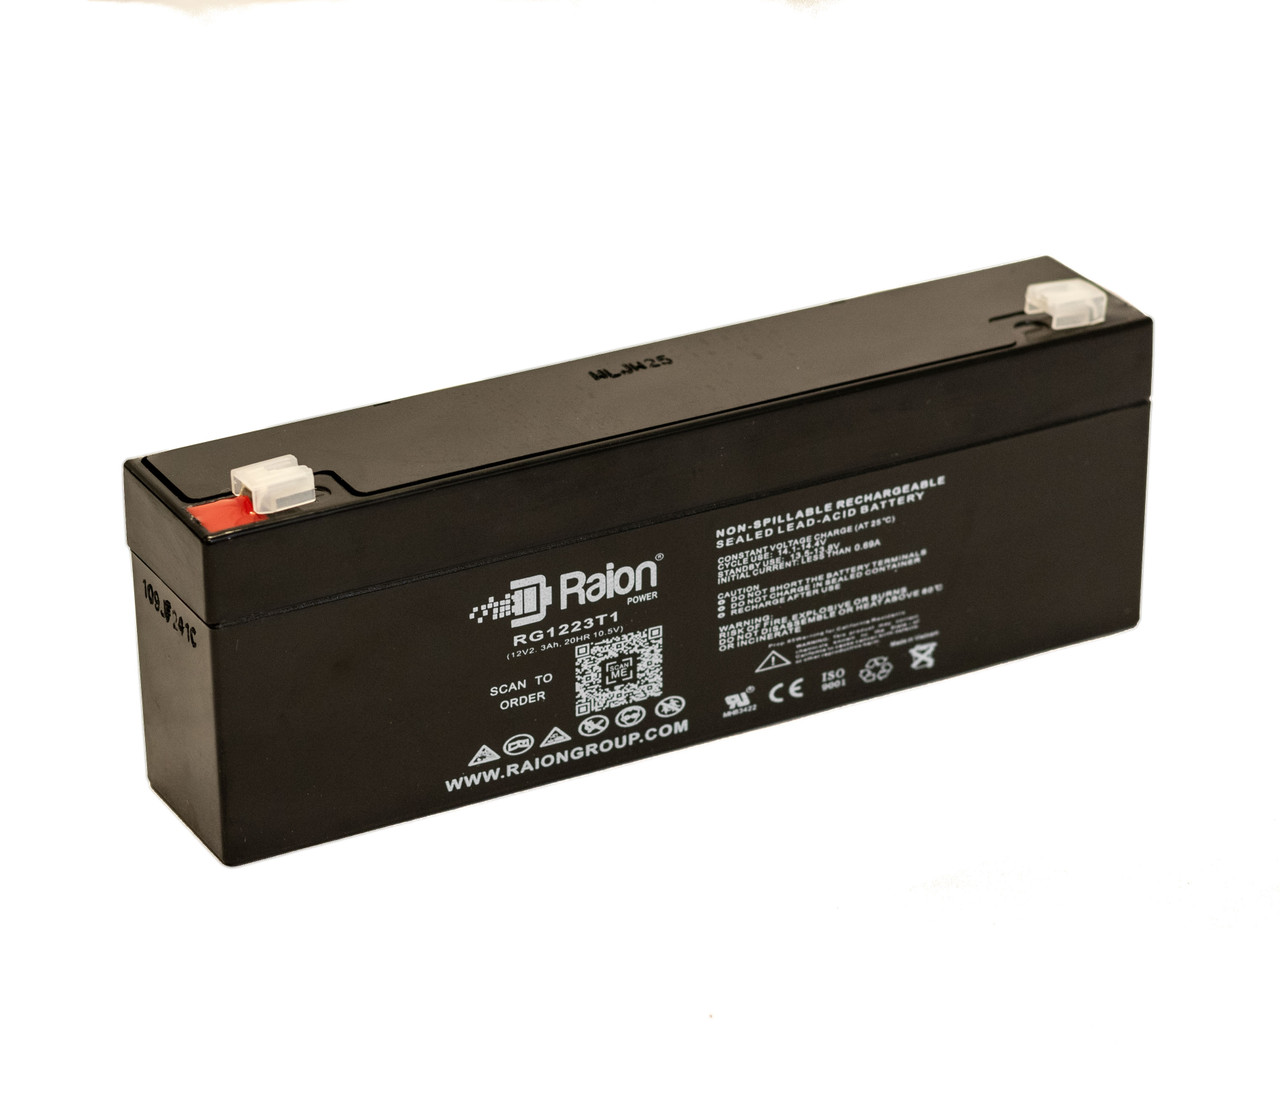 Raion Power RG1223T1 Replacement Battery for NERBO NB 2.3-12